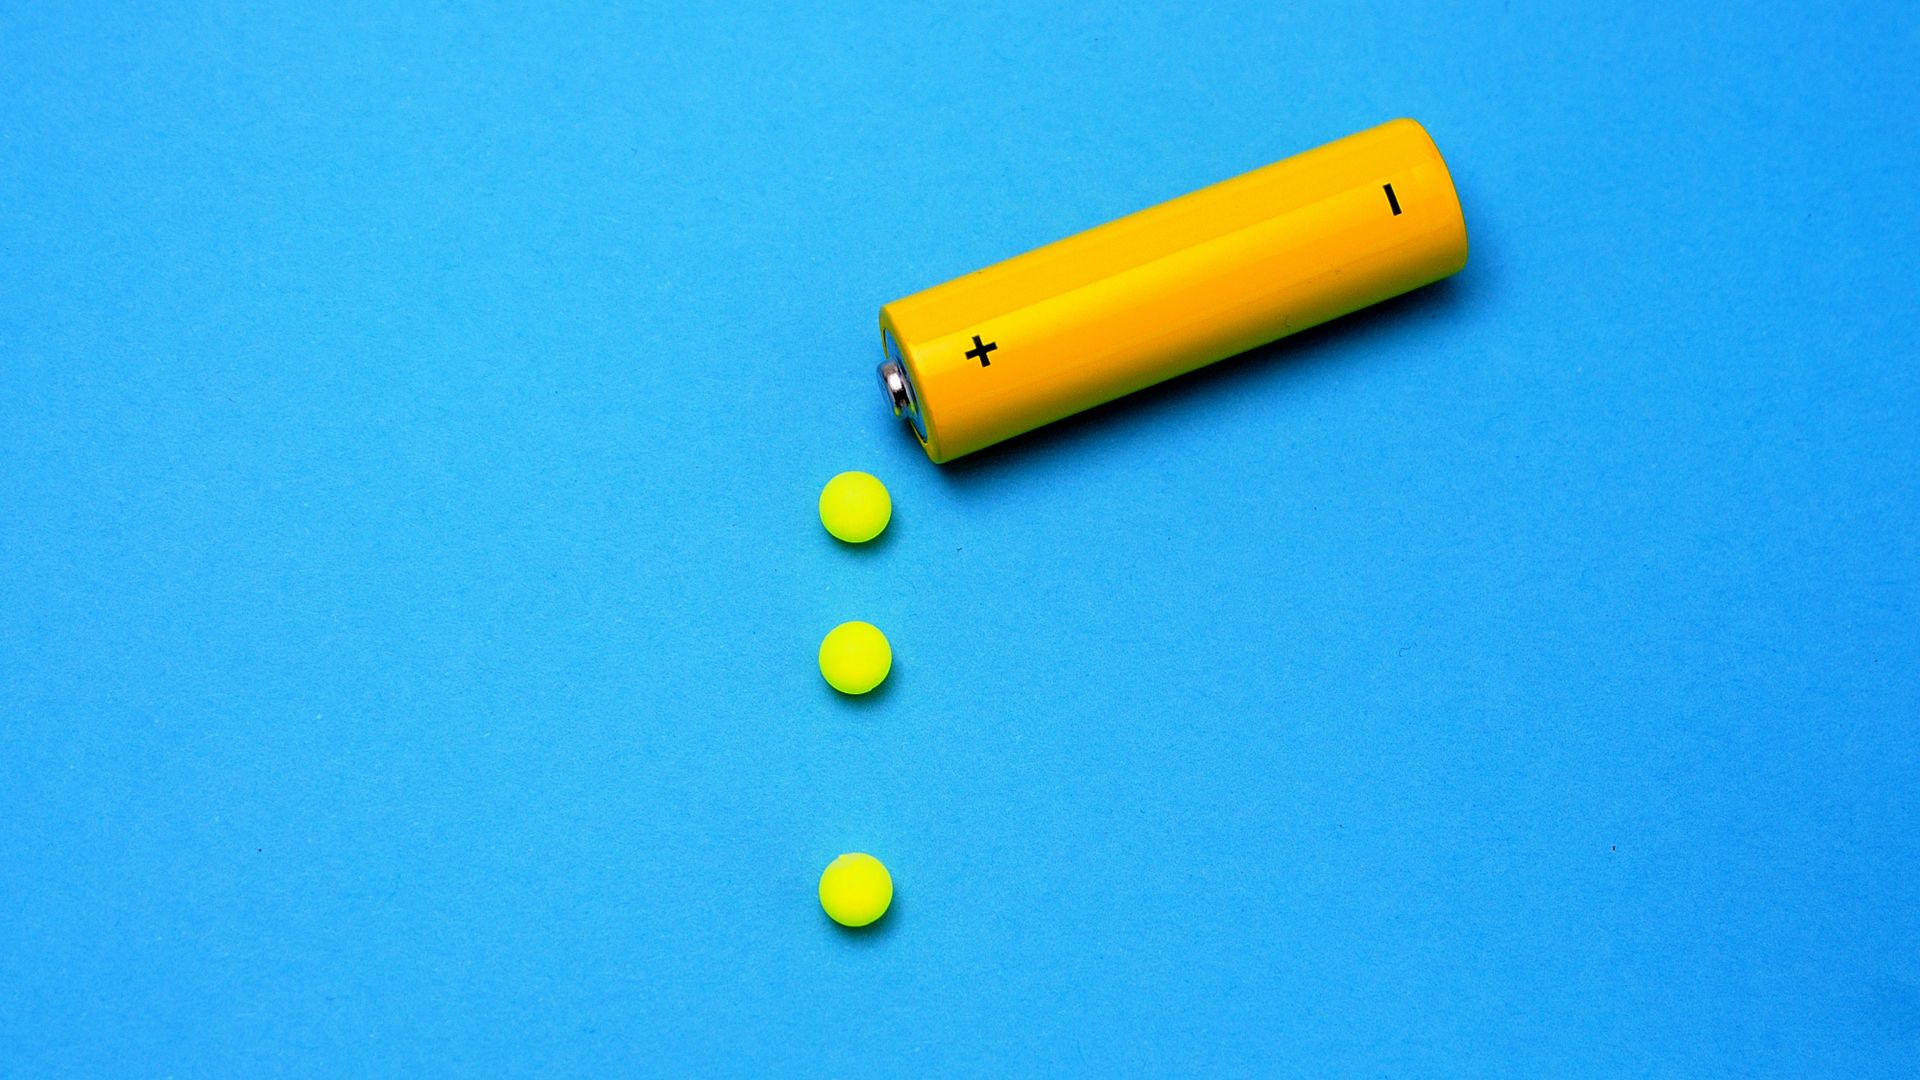 In this image, a yellow battery drips yellow circles on top of a blue background.